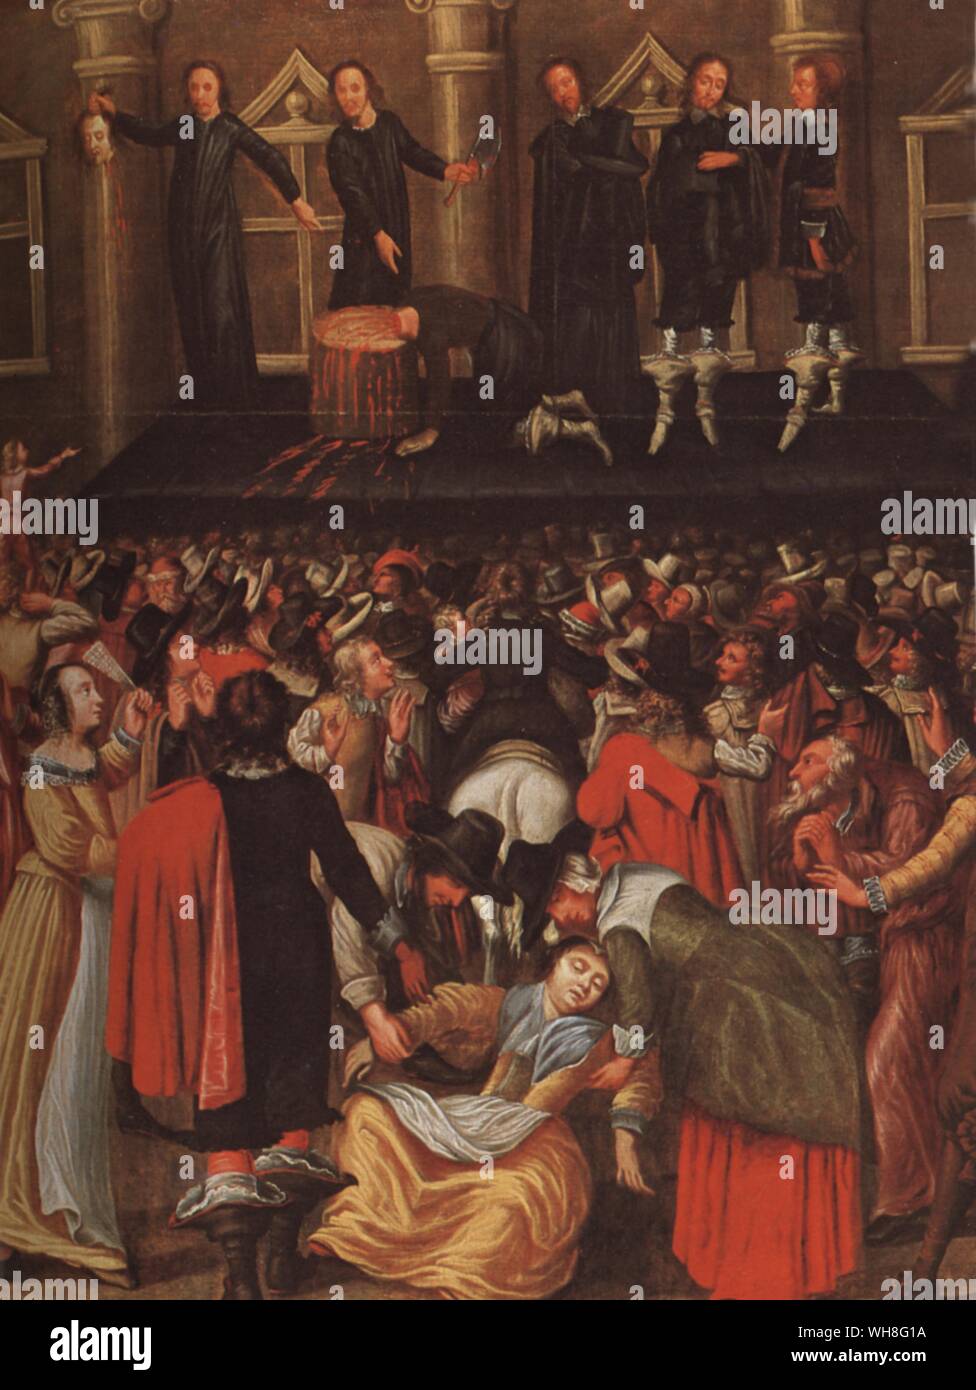 An artist's impression of the execution of Charles I (1600-1649). King of England, Scotland and Ireland. This War Without An Enemy by Richard Ollard, page 201.. When Charles was beheaded on 30 January 1649, a moan was heard from the assembled crowd, some of whom then dipped their handkerchiefs in his blood, thus starting the cult of the Martyr King. There is some historical debate over the identity of the man who beheaded the King, who was masked at the scene. Stock Photo